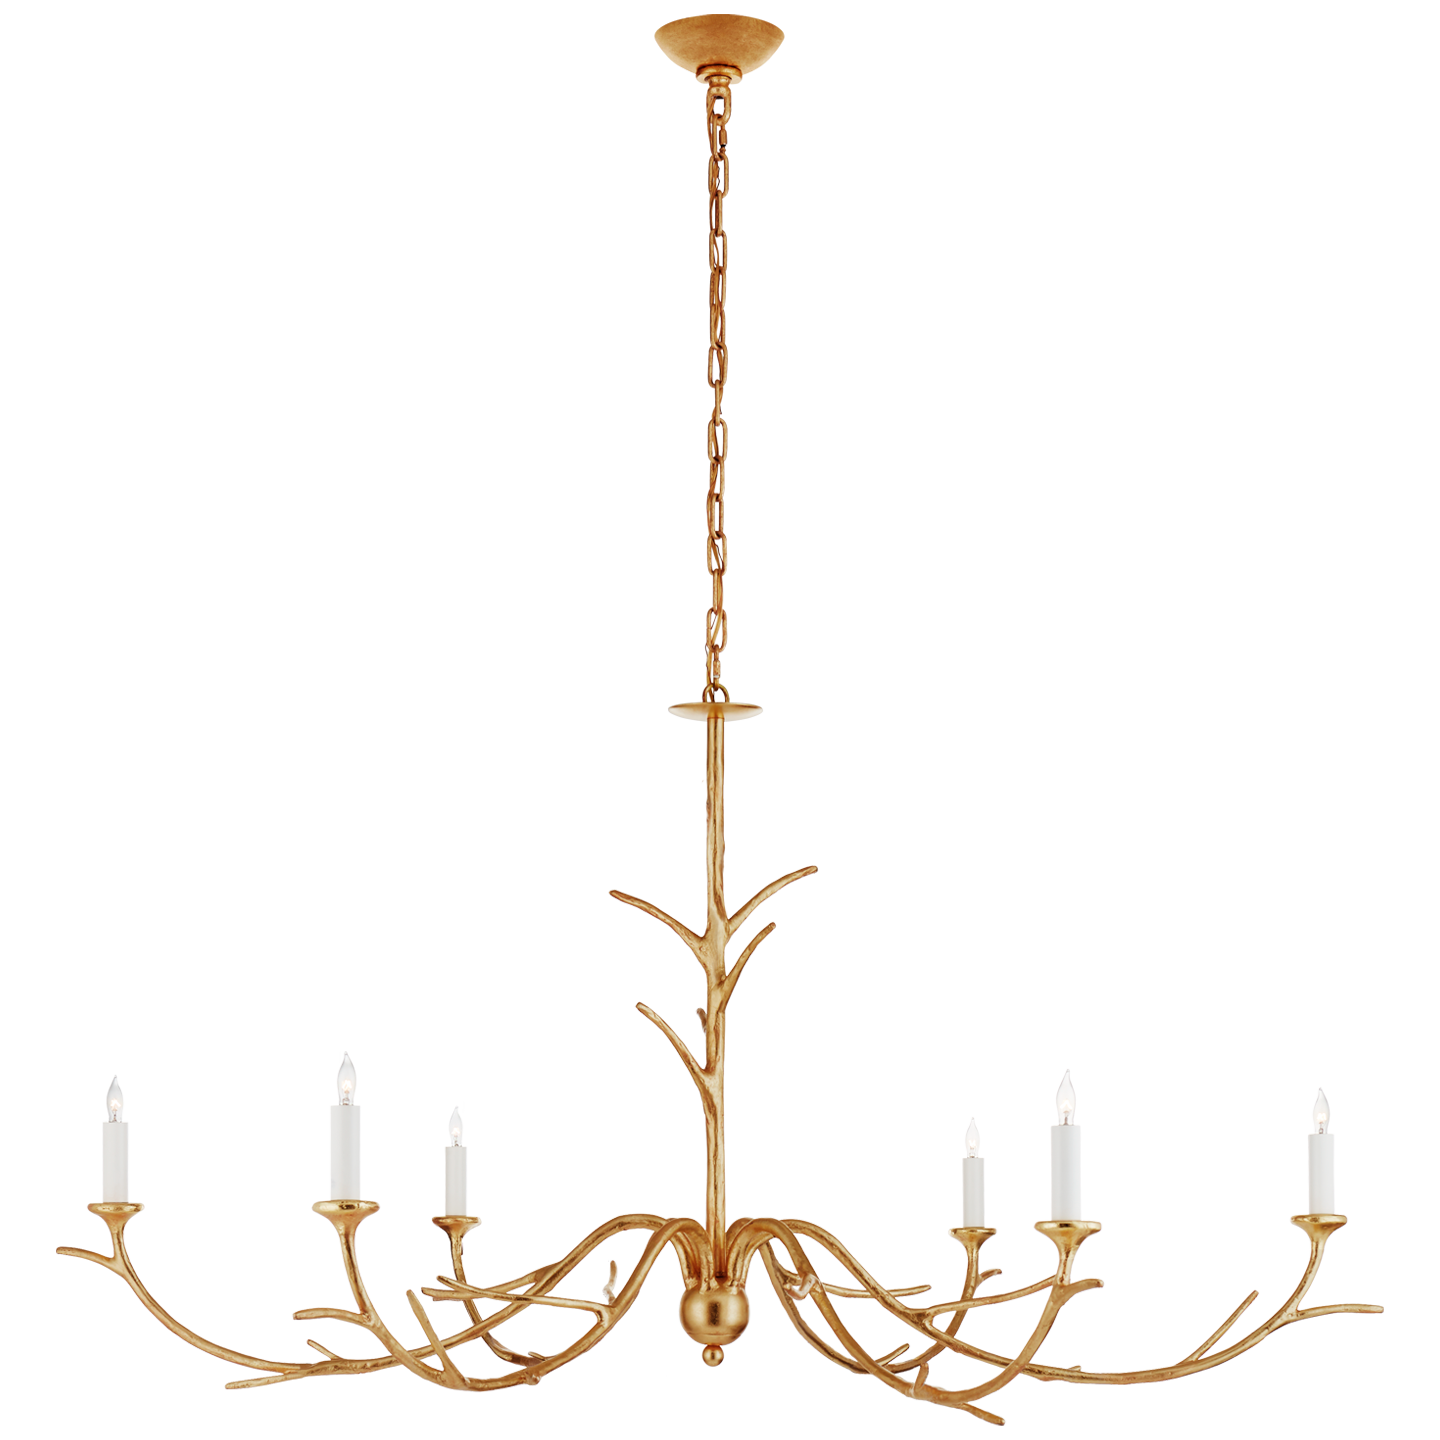 A mix between our favorite Spider Chandelier and Silva Chandelier, this Iberia Large Chandelier will bring a warm, elegant look to any space!  Designer:  Julie Neill